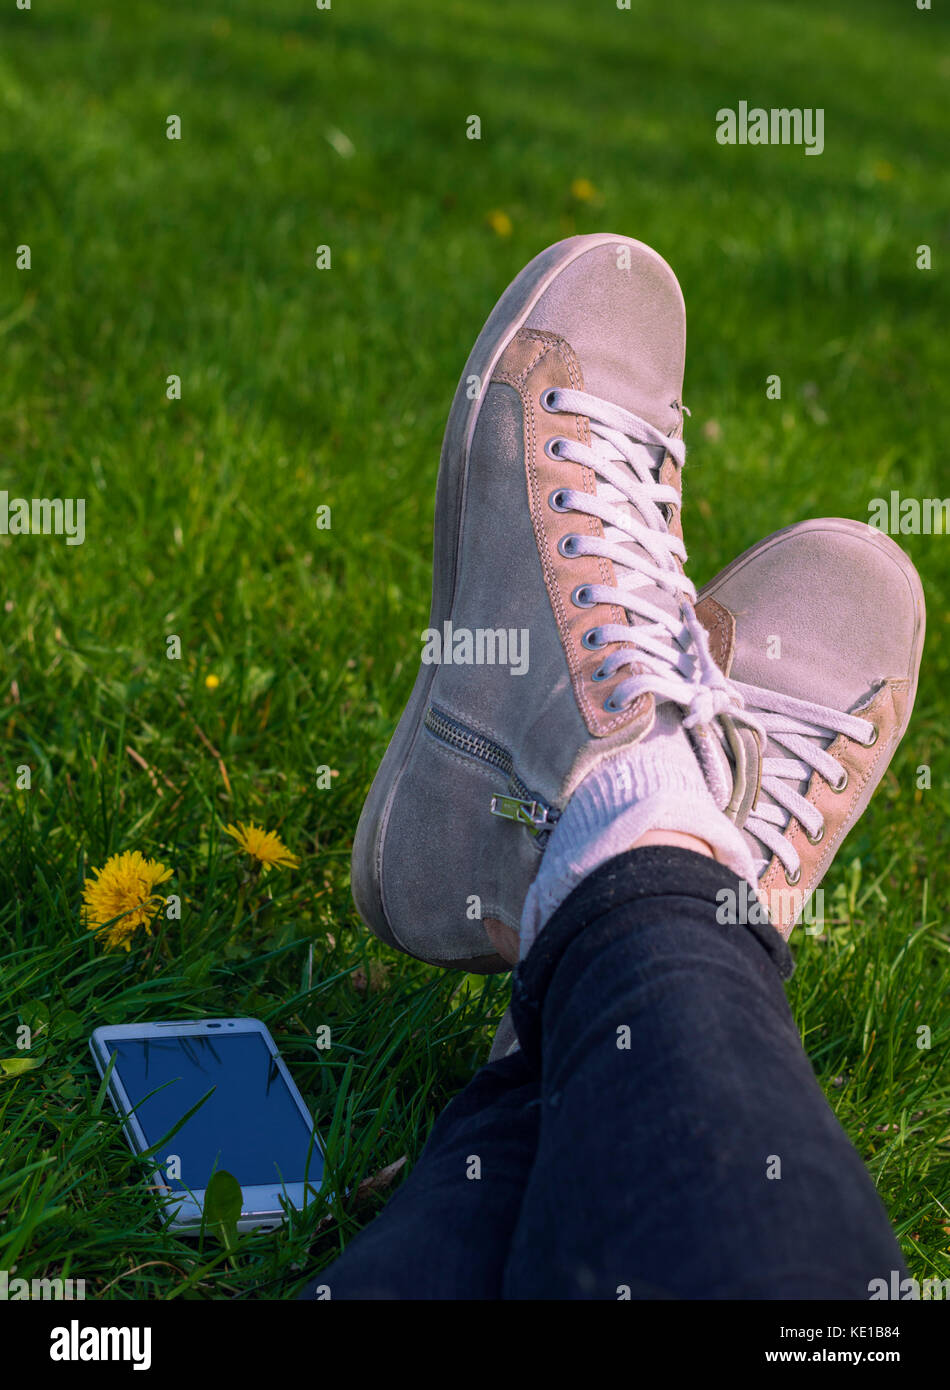 Close up of female lying on grass: snicker shoes and mobile phone nearby  Stock Photo - Alamy